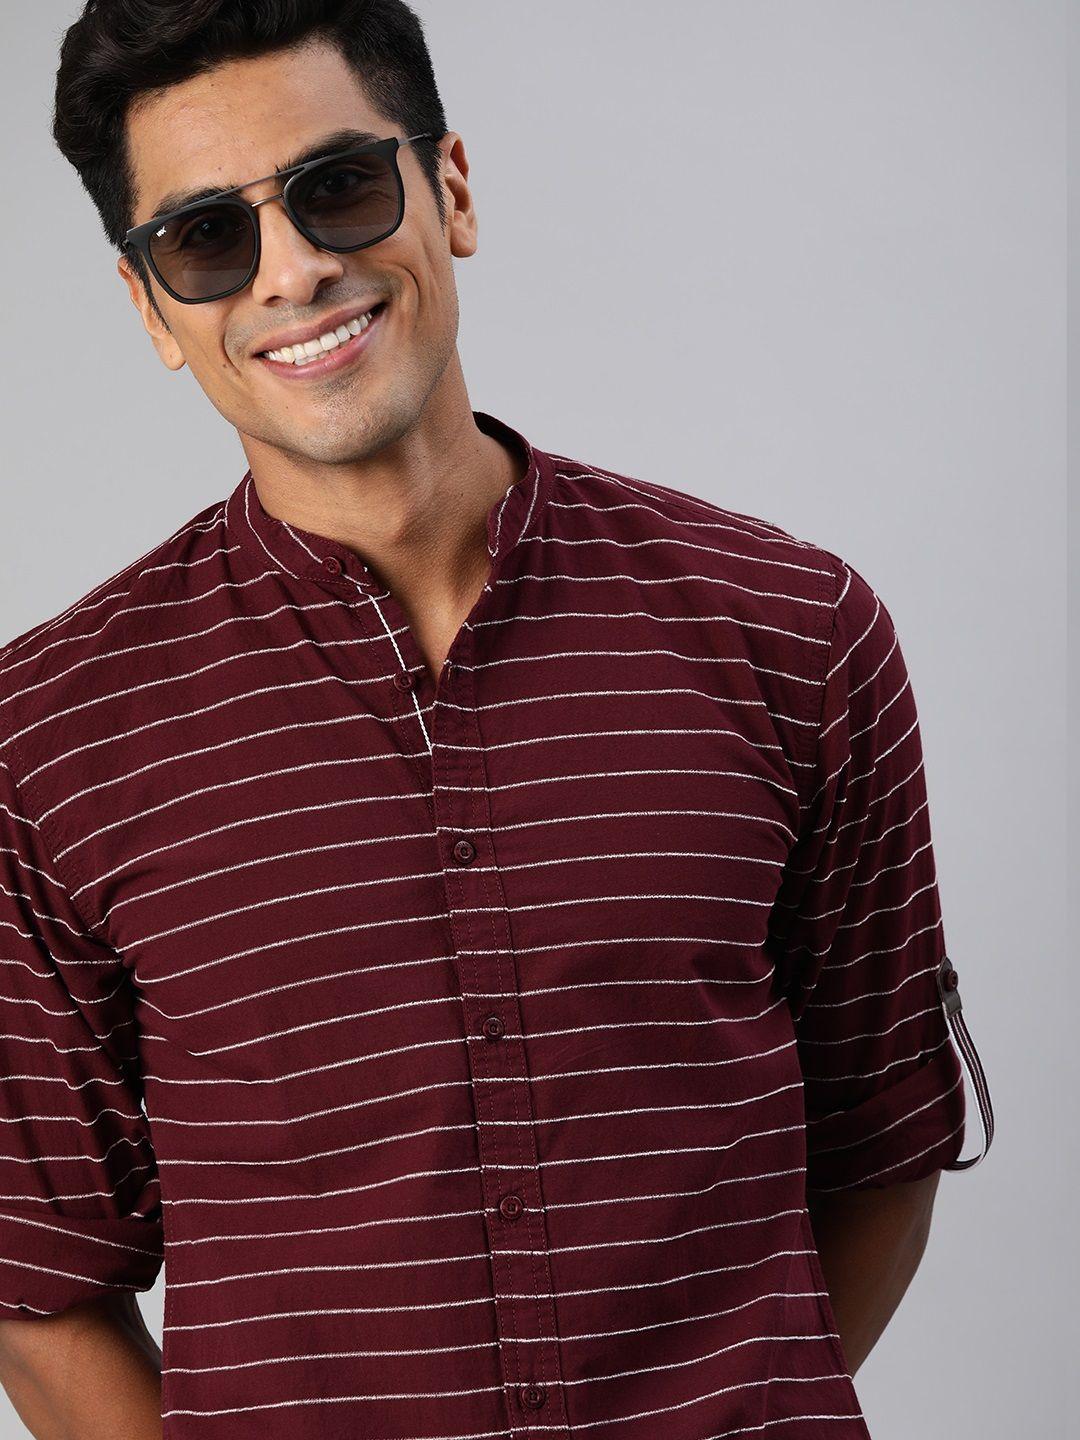 here&now men maroon & white regular fit striped casual shirt